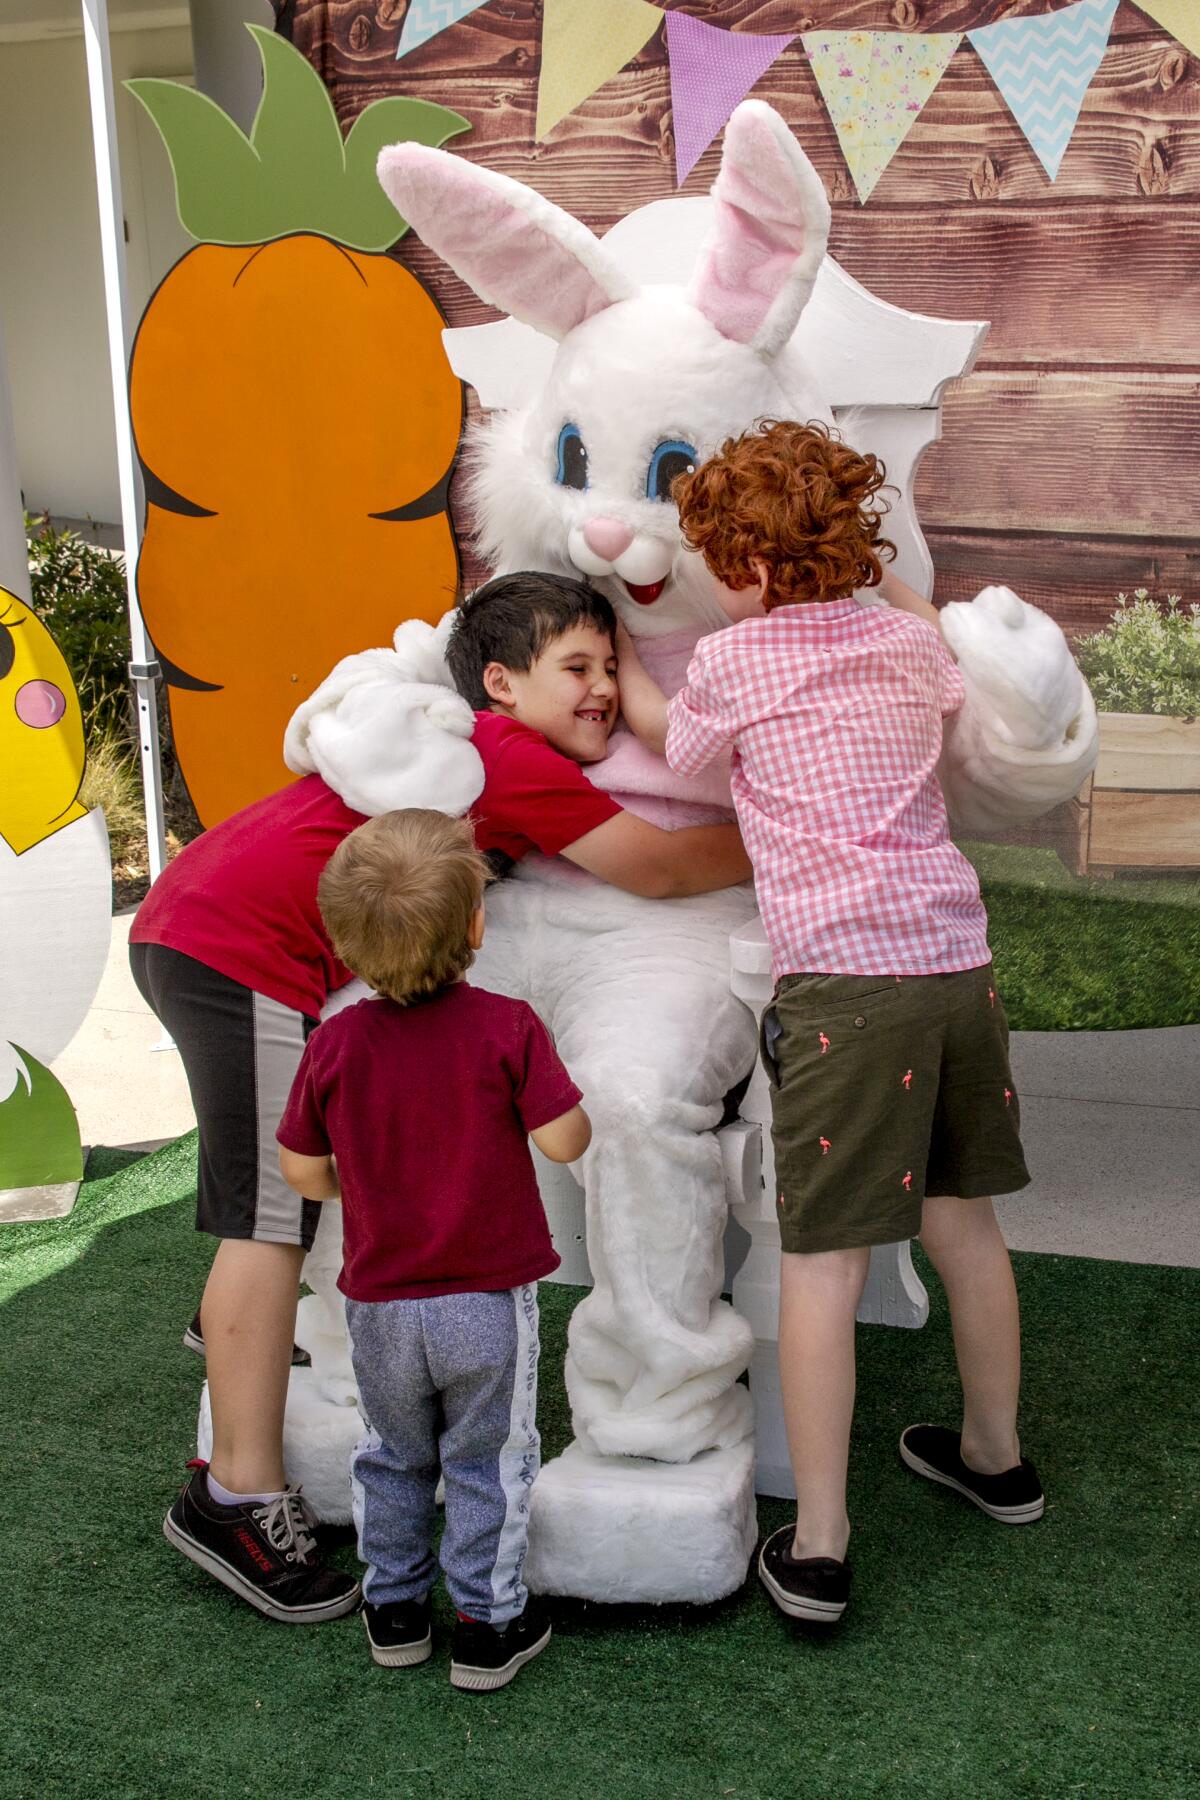 Alexander Eyre, 7, Arta Abraham, 7, and Allen Abraham, 2, with a Spring Bunny.